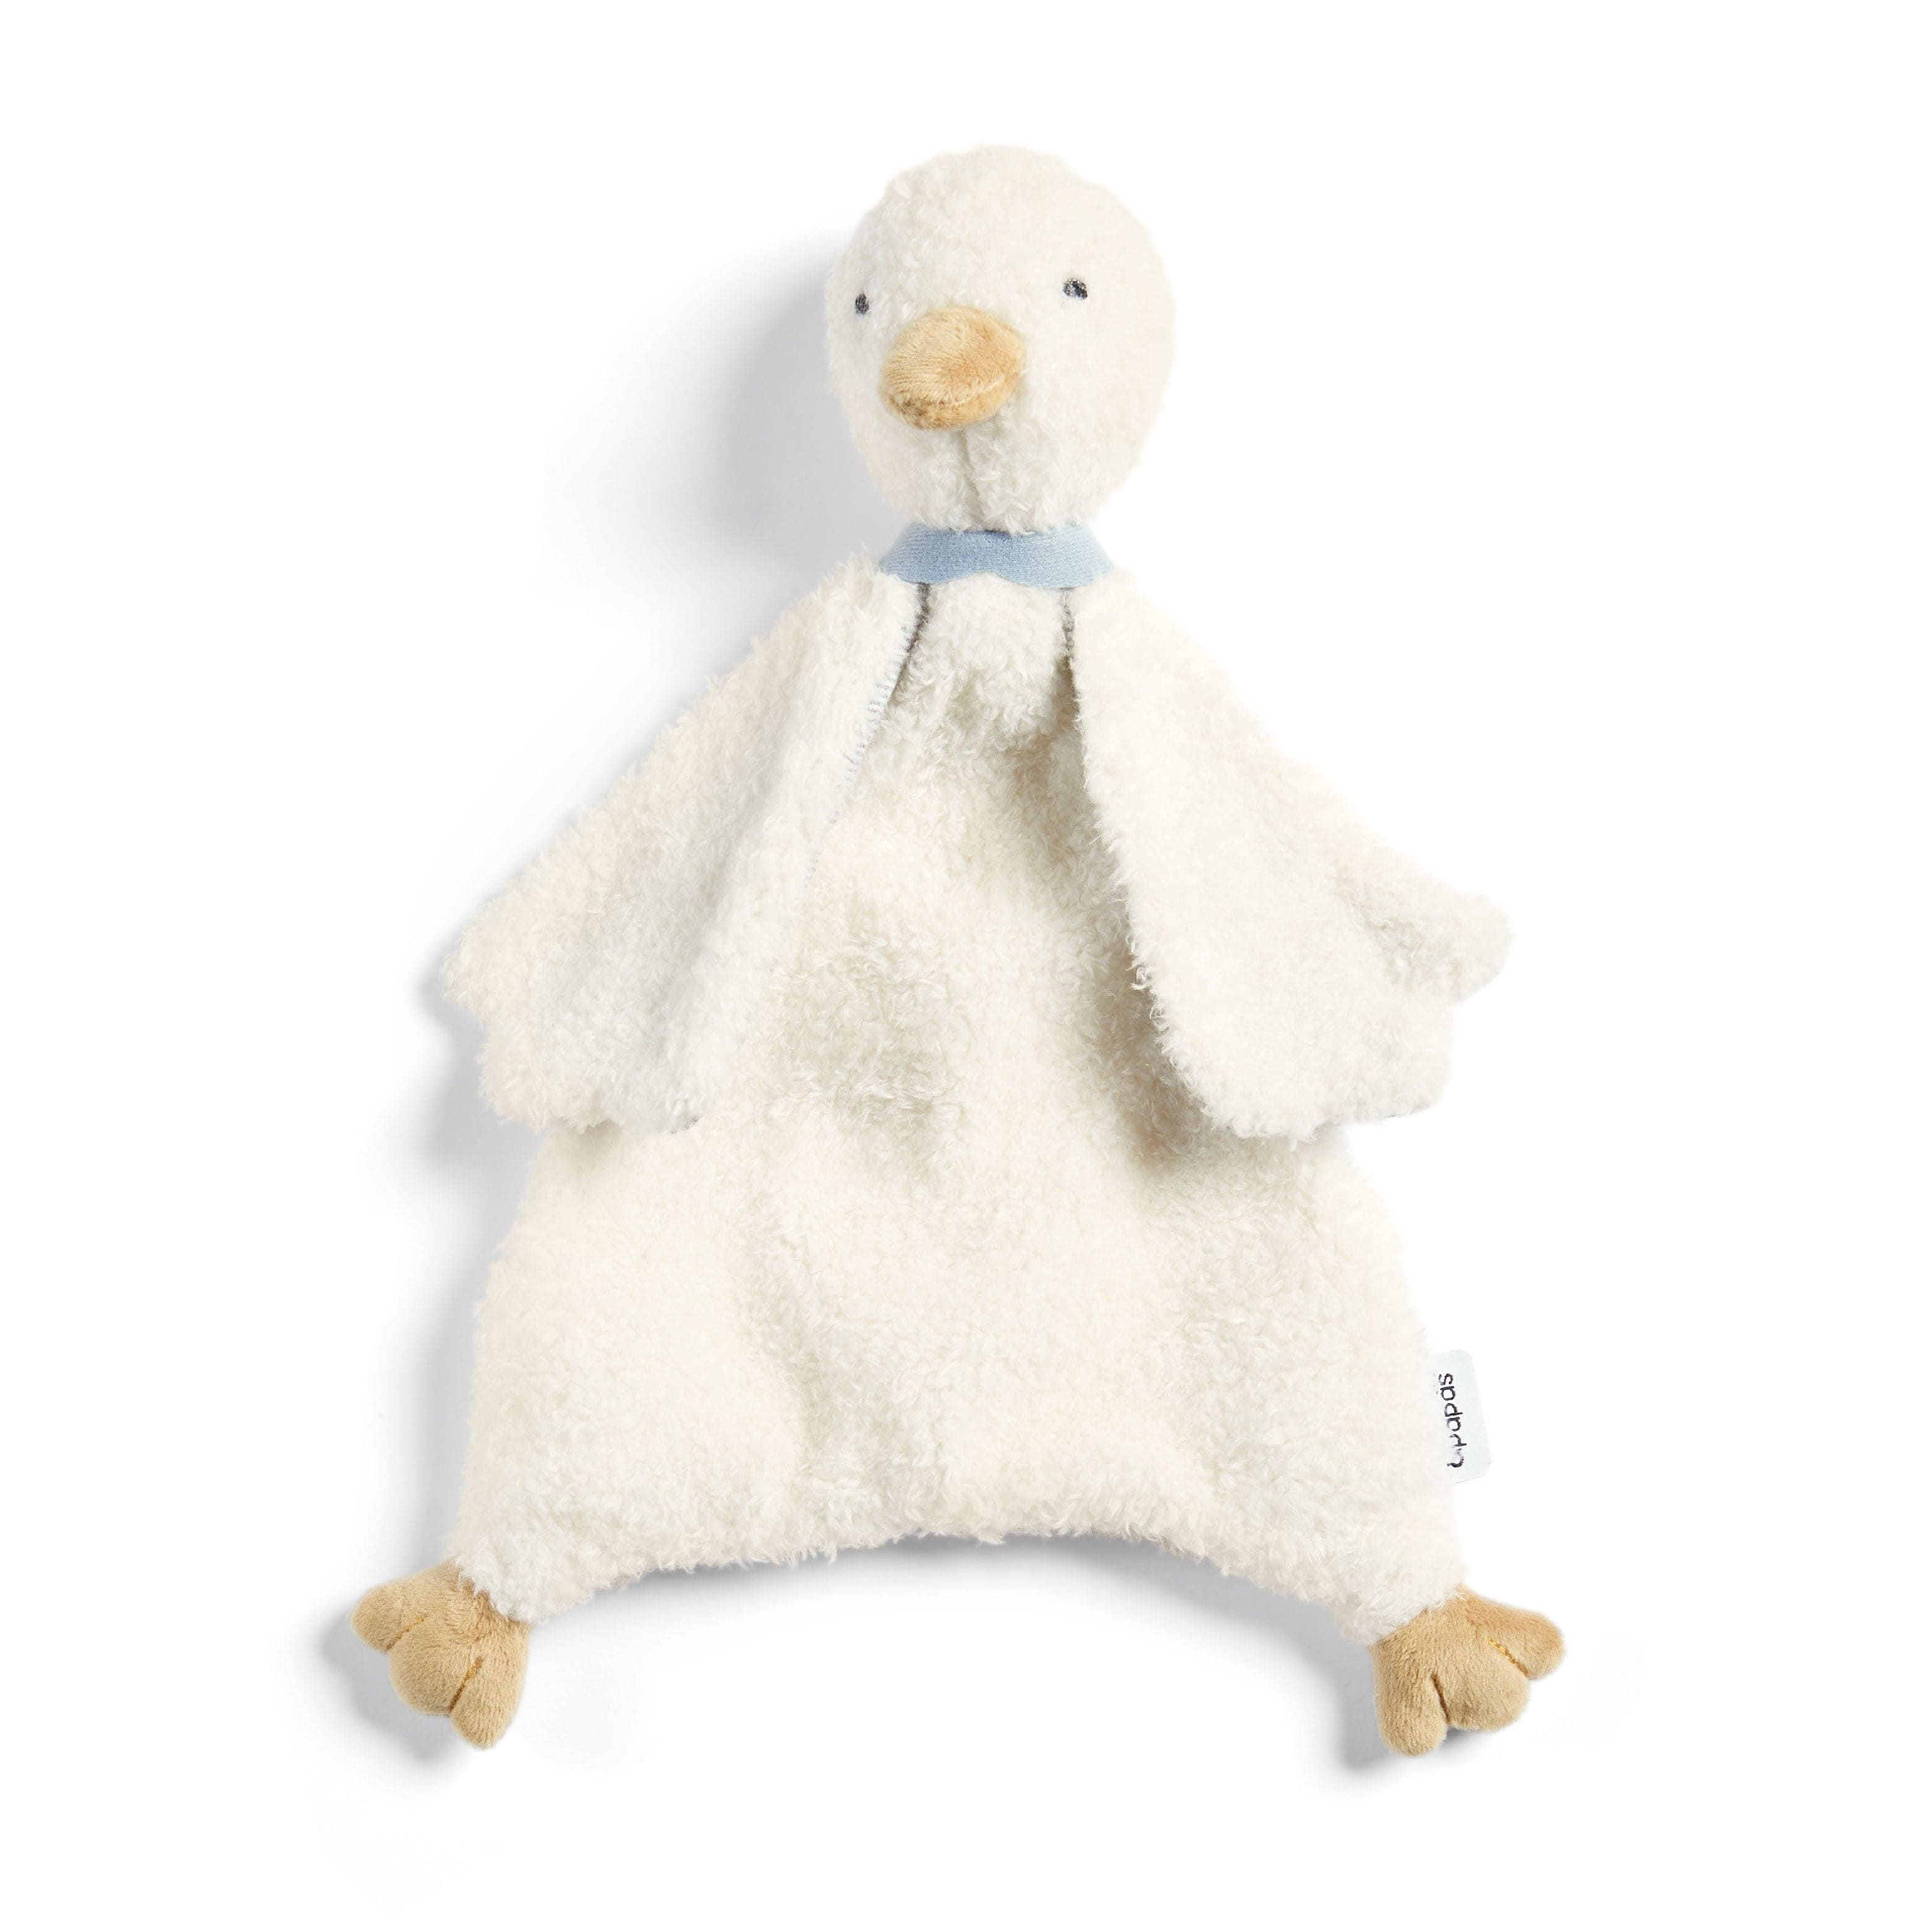 Mamas & Papas Welcome to the World Comforter - Duck Soft Animals 7580V0802